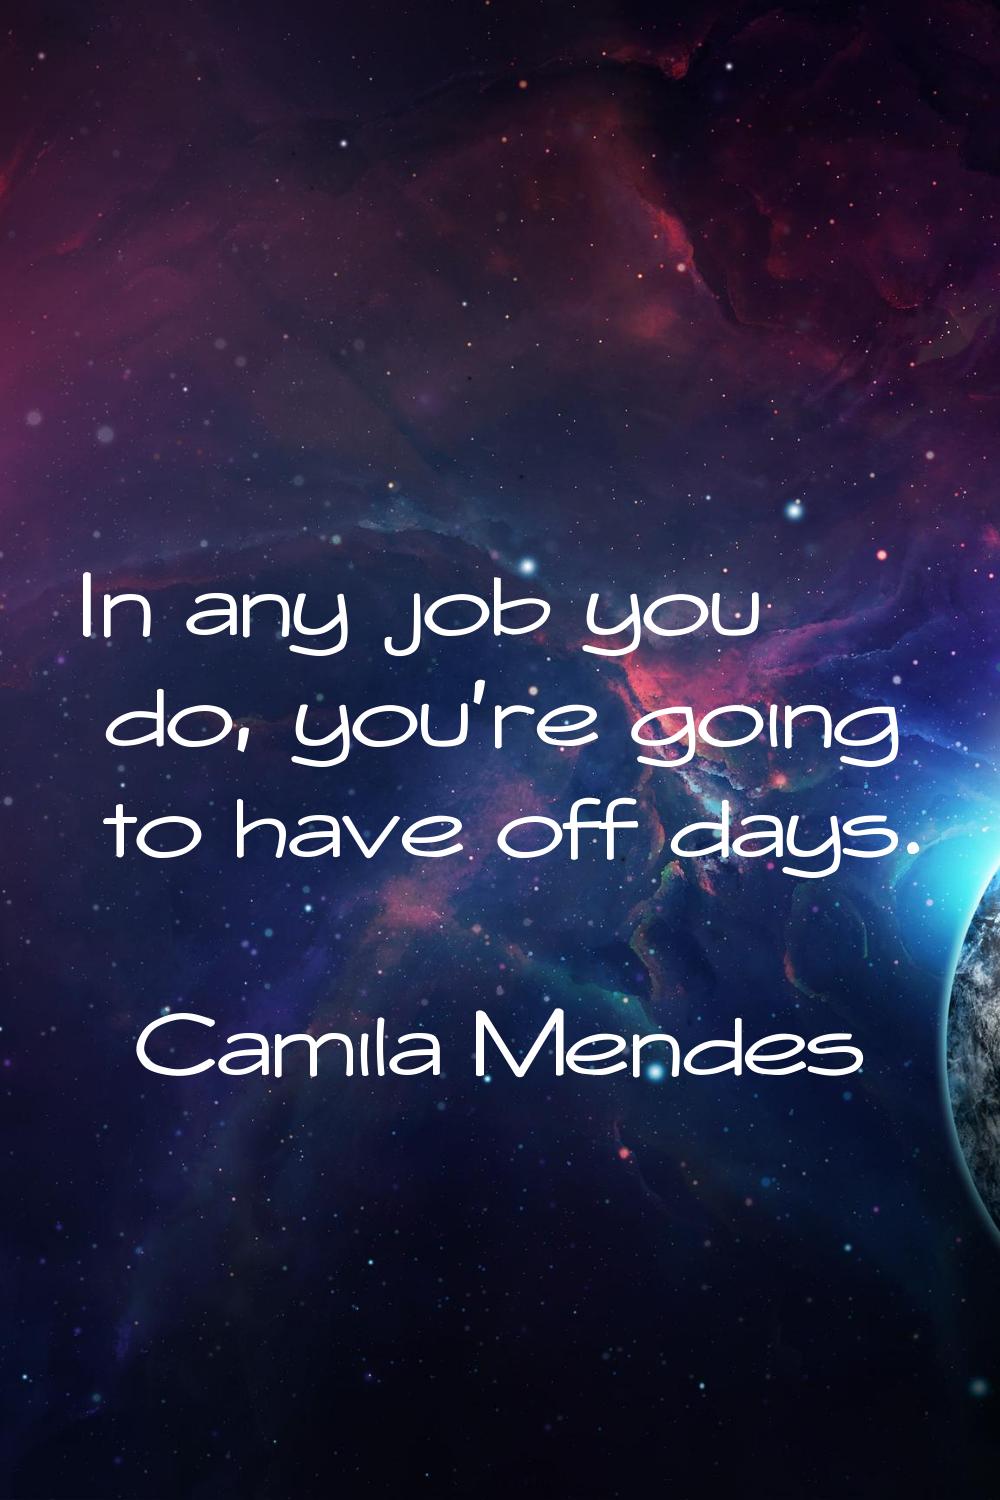 In any job you do, you're going to have off days.